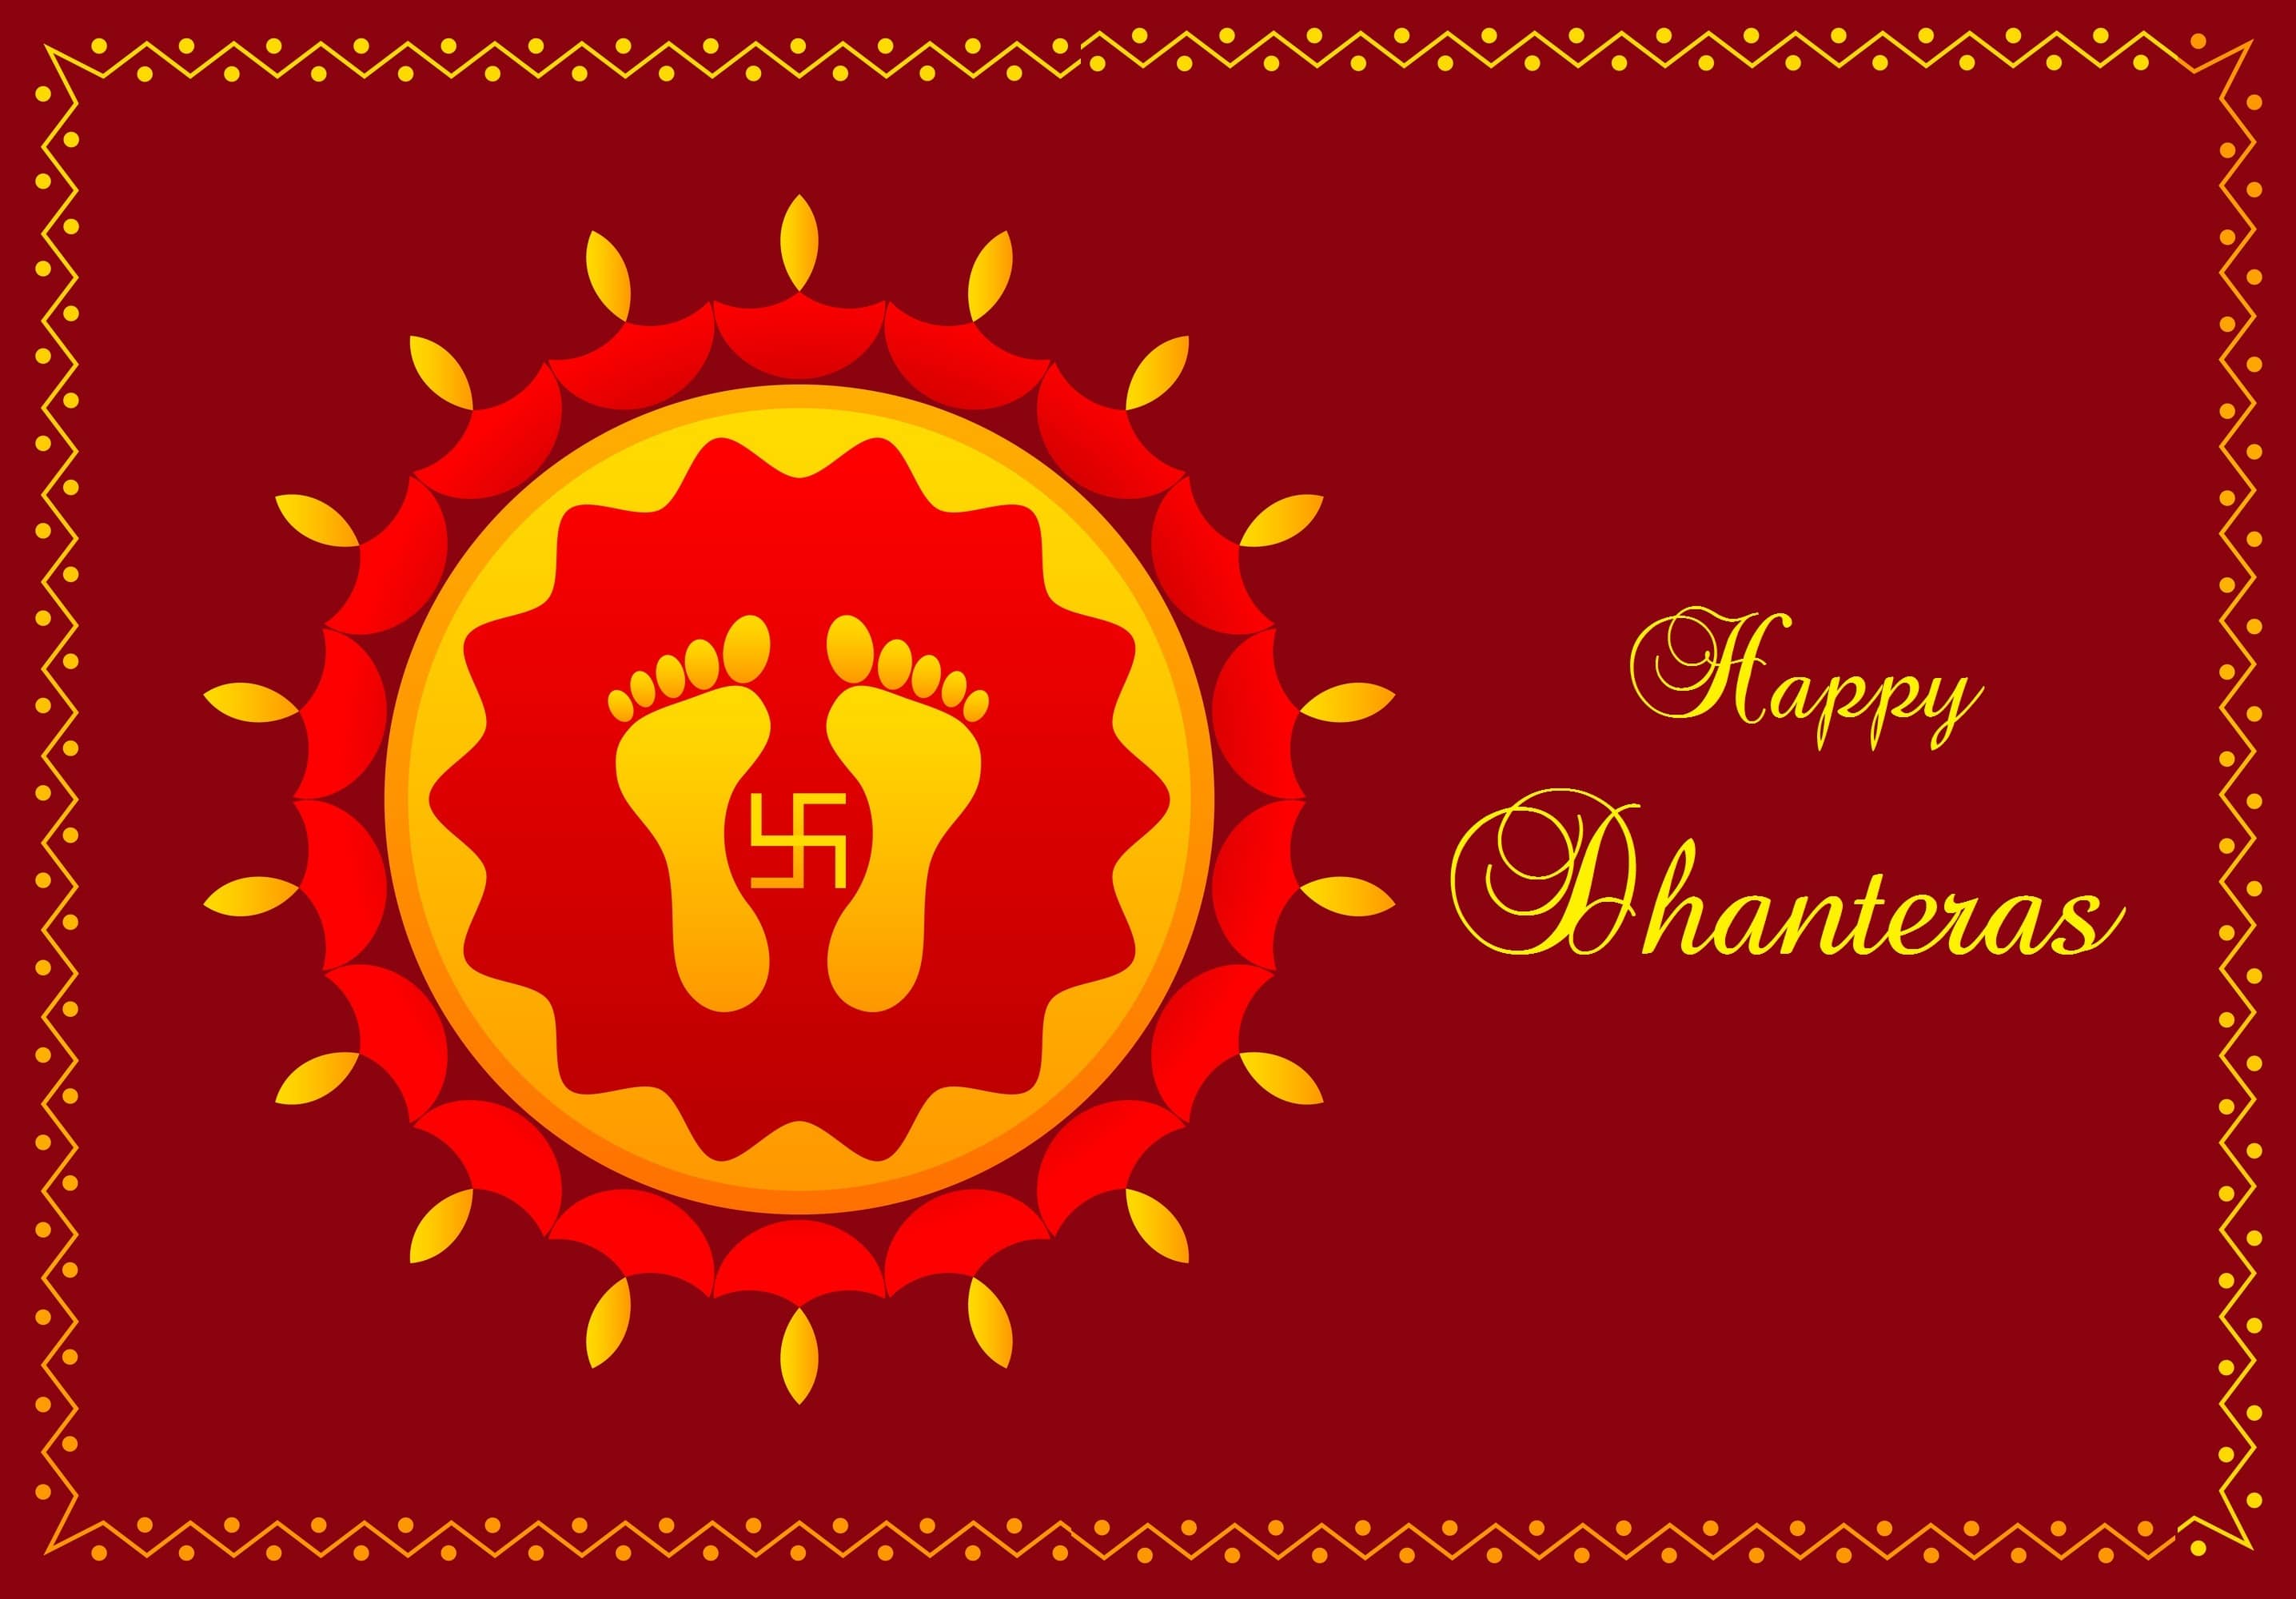 Happy Dhanteras Wishes In Hindi 